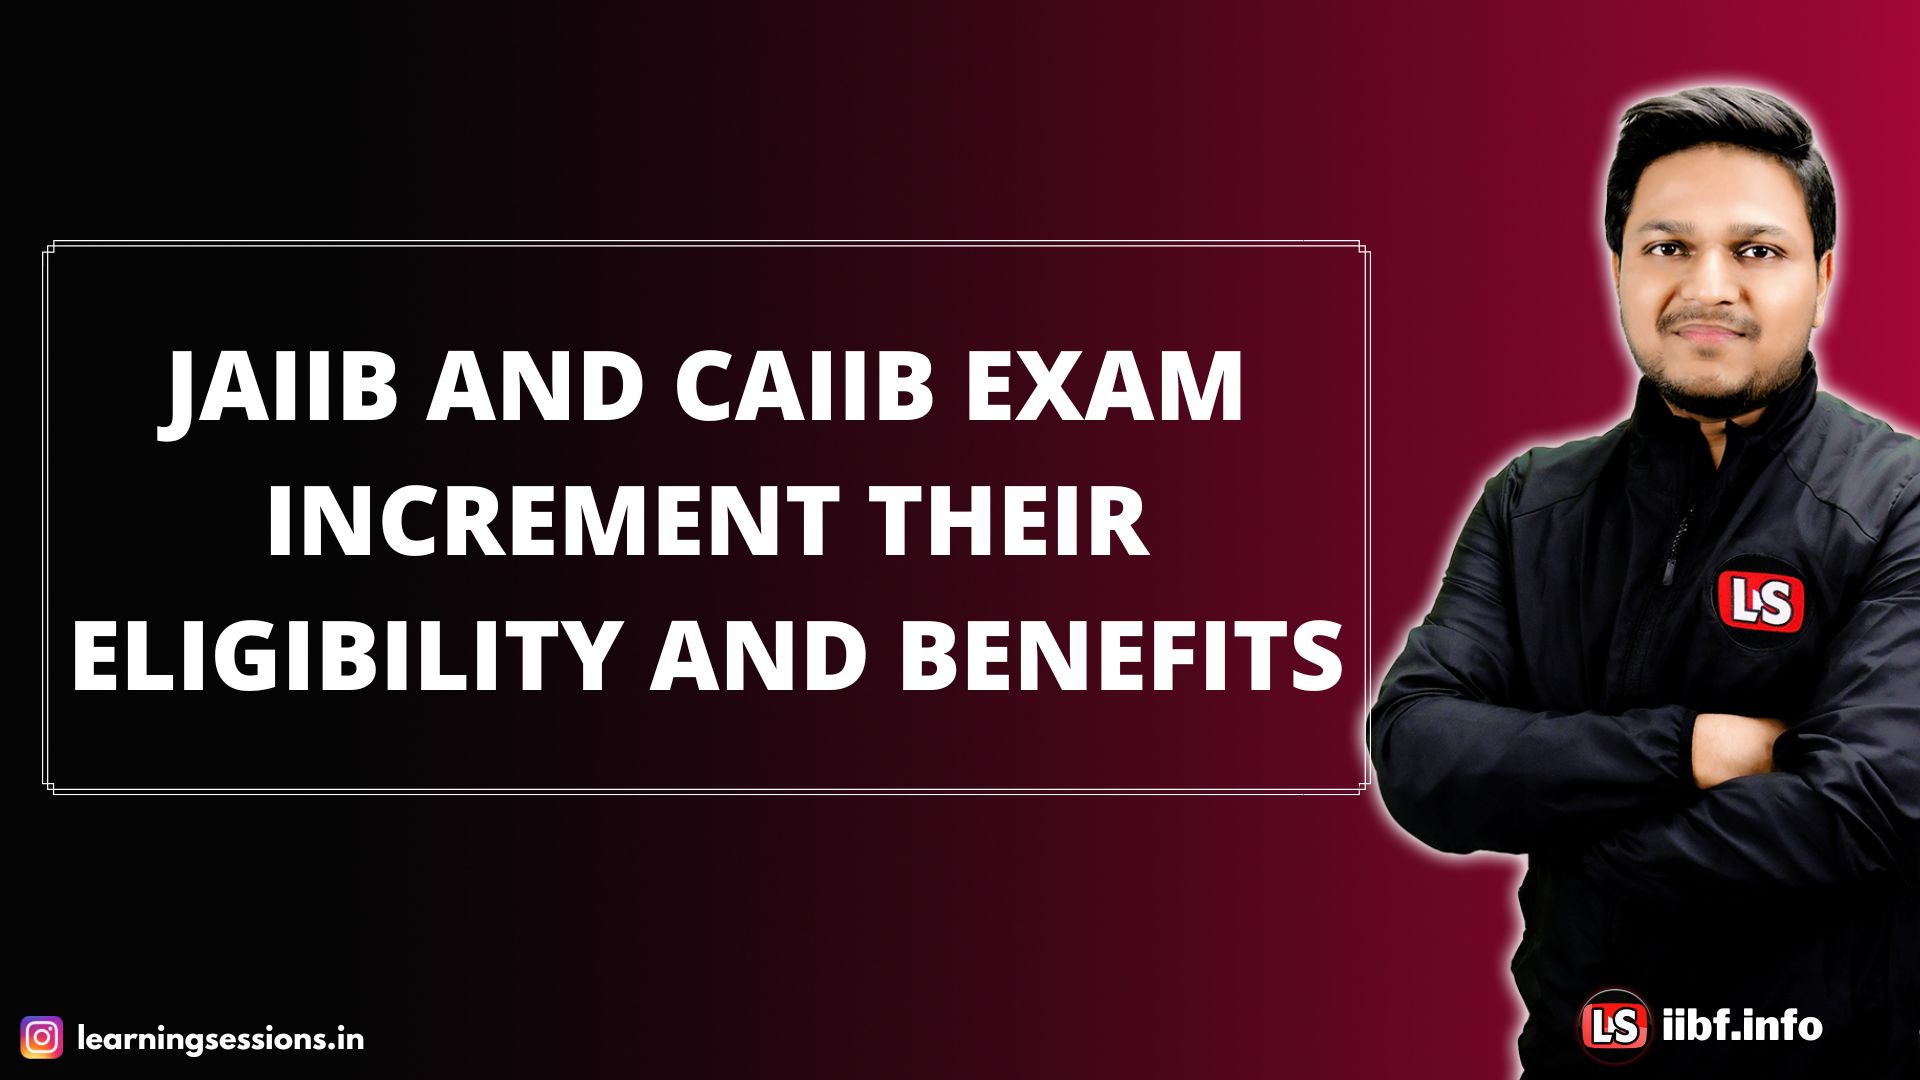 JAIIB And CAIIB Exam Increment Their Eligibility and Benefits to Bankers